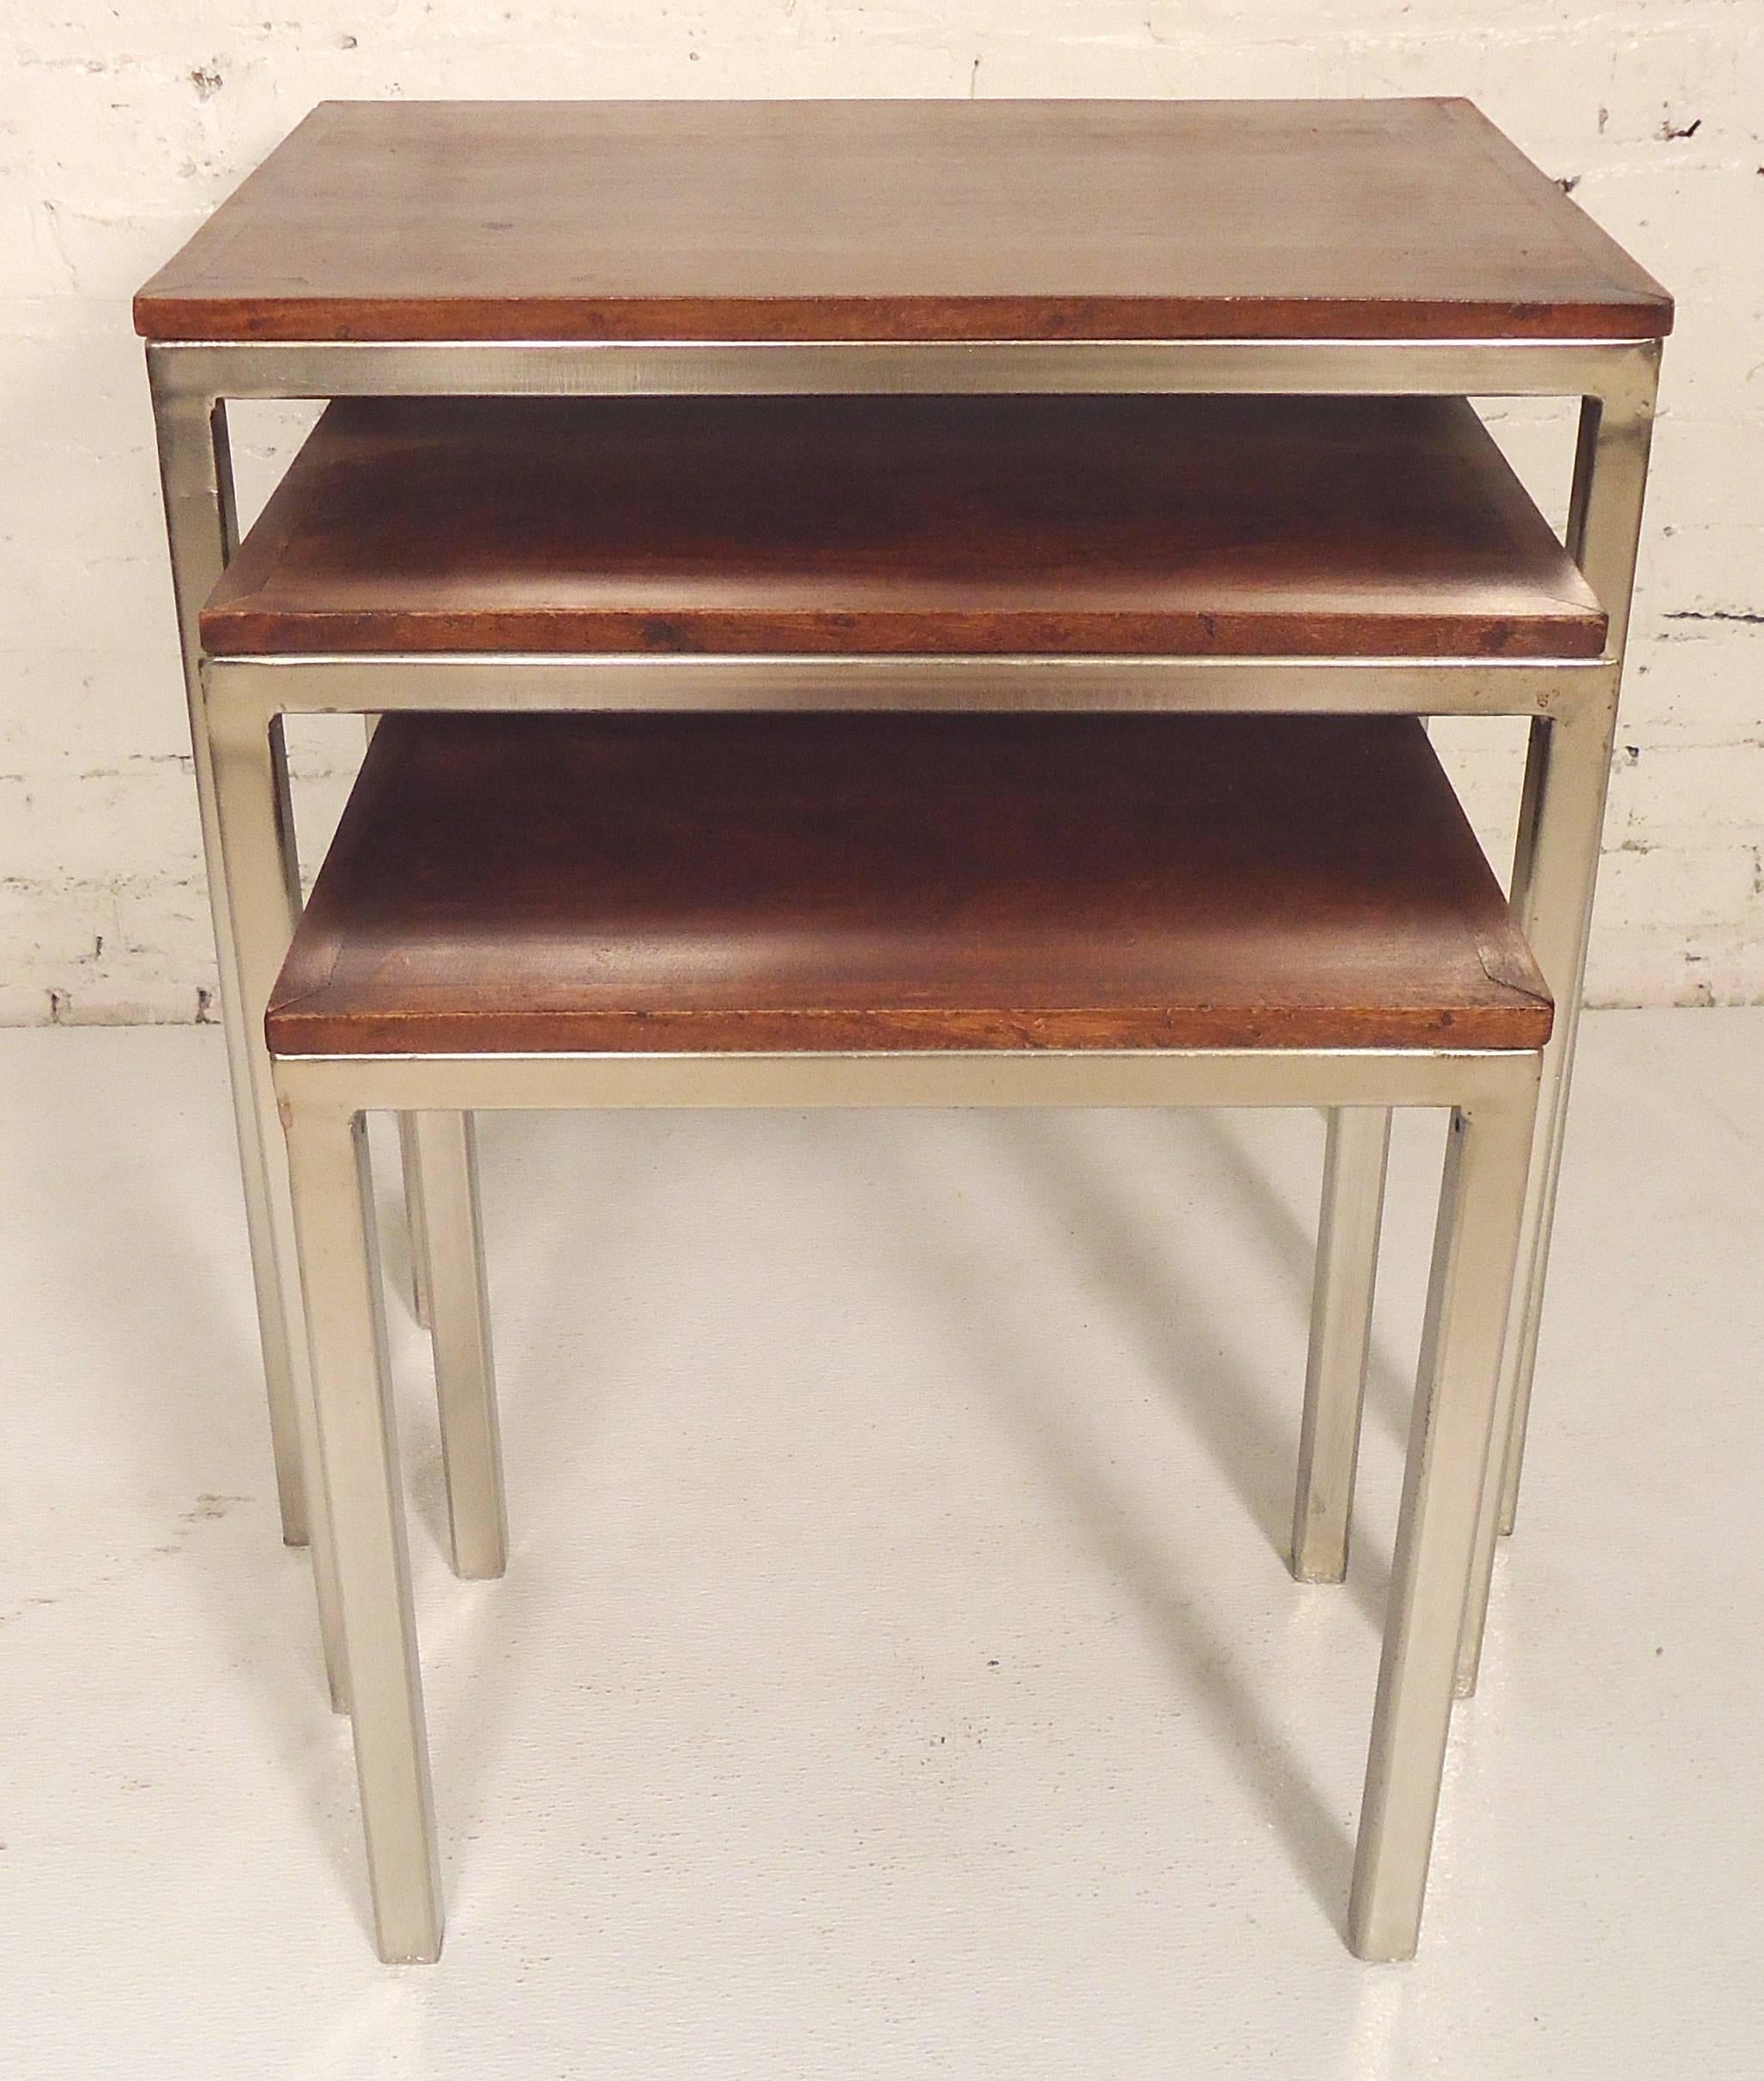 Three nesting side tables with polished chrome frame and wood tops. In the style of Florence Knoll's chrome tables.
Measure: Large 24 x 16 x 24.5
Medium 21 x 12.5 x 21.5
Small 17 x 10 x 18

(Please confirm item location, NY or NJ, with